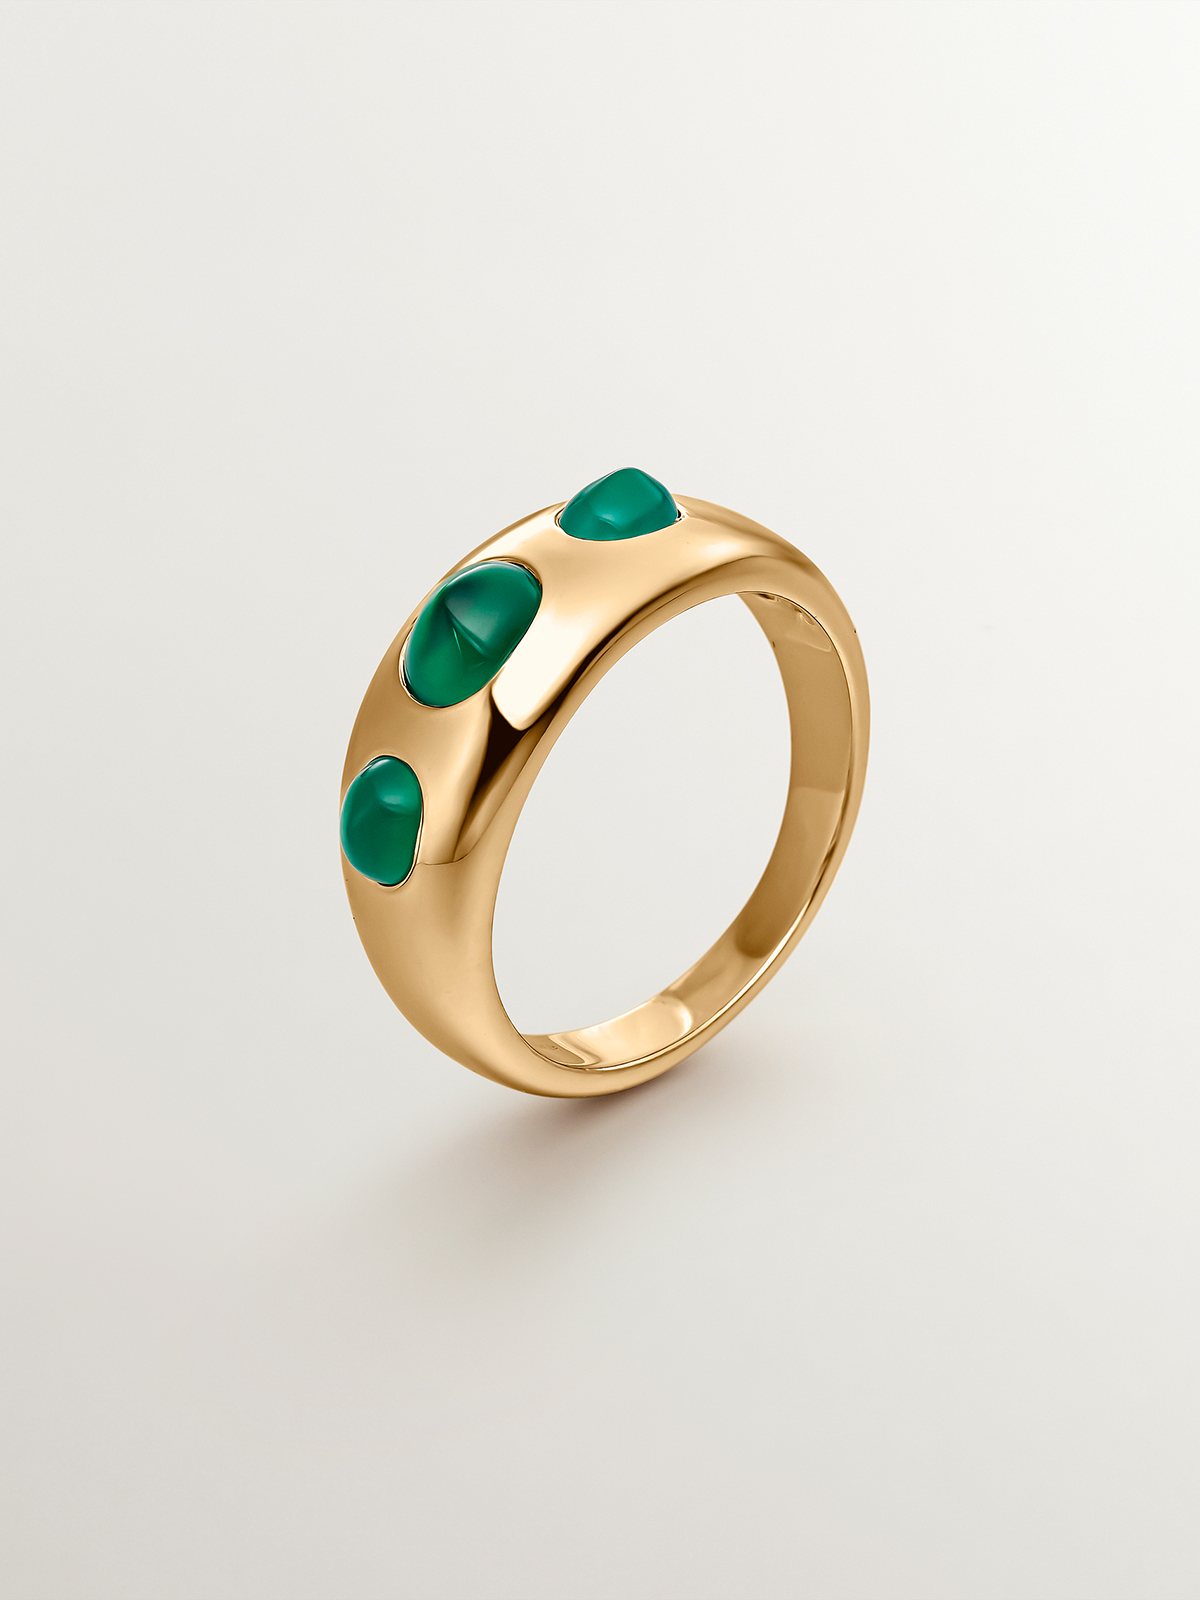 925 silver ring bathed in 18k yellow gold with green chalcedony